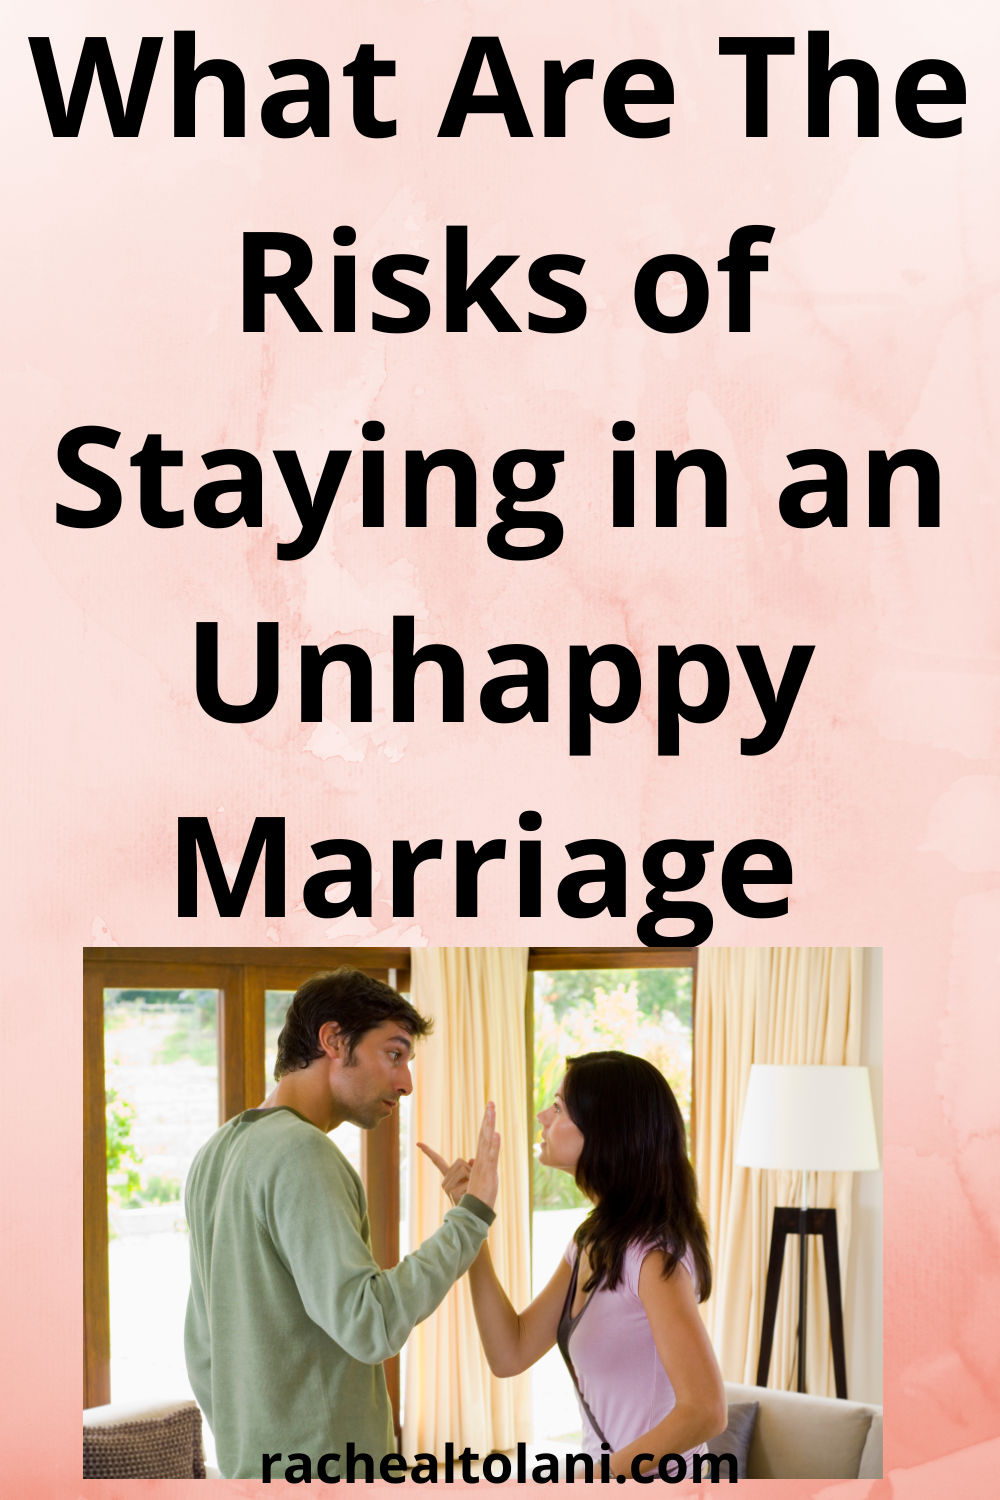 Consequences of staying in an unhappy marriage